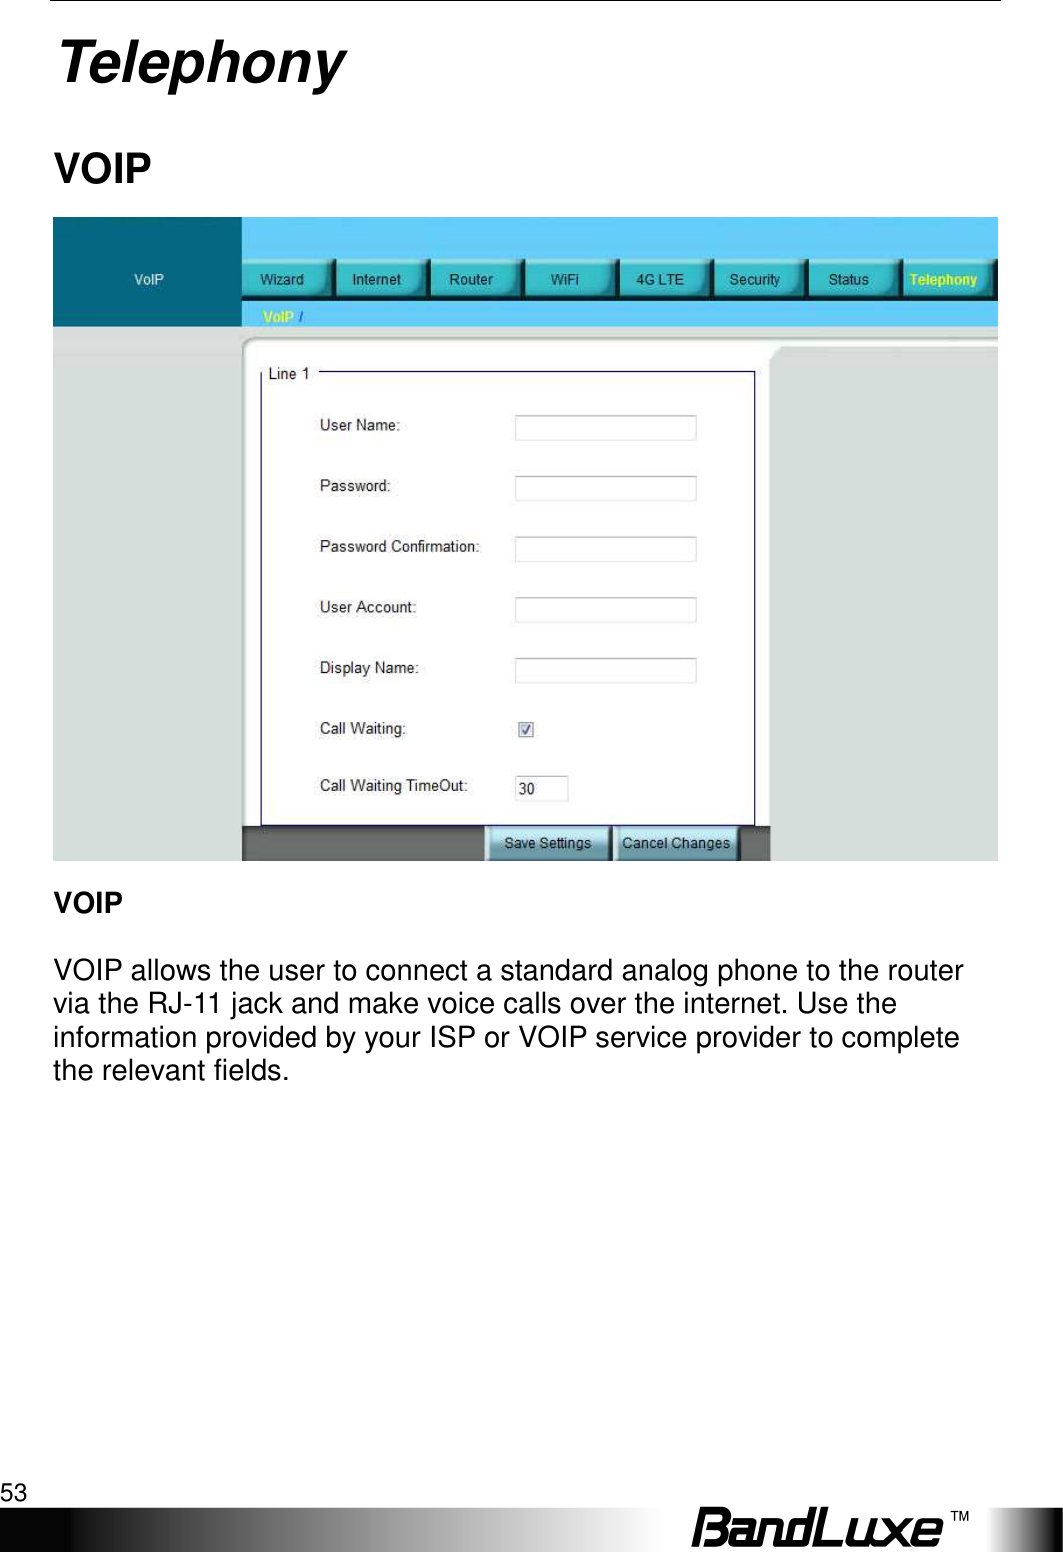   Telephony 53 Telephony VOIP  VOIP  VOIP allows the user to connect a standard analog phone to the router via the RJ-11 jack and make voice calls over the internet. Use the information provided by your ISP or VOIP service provider to complete the relevant fields. 